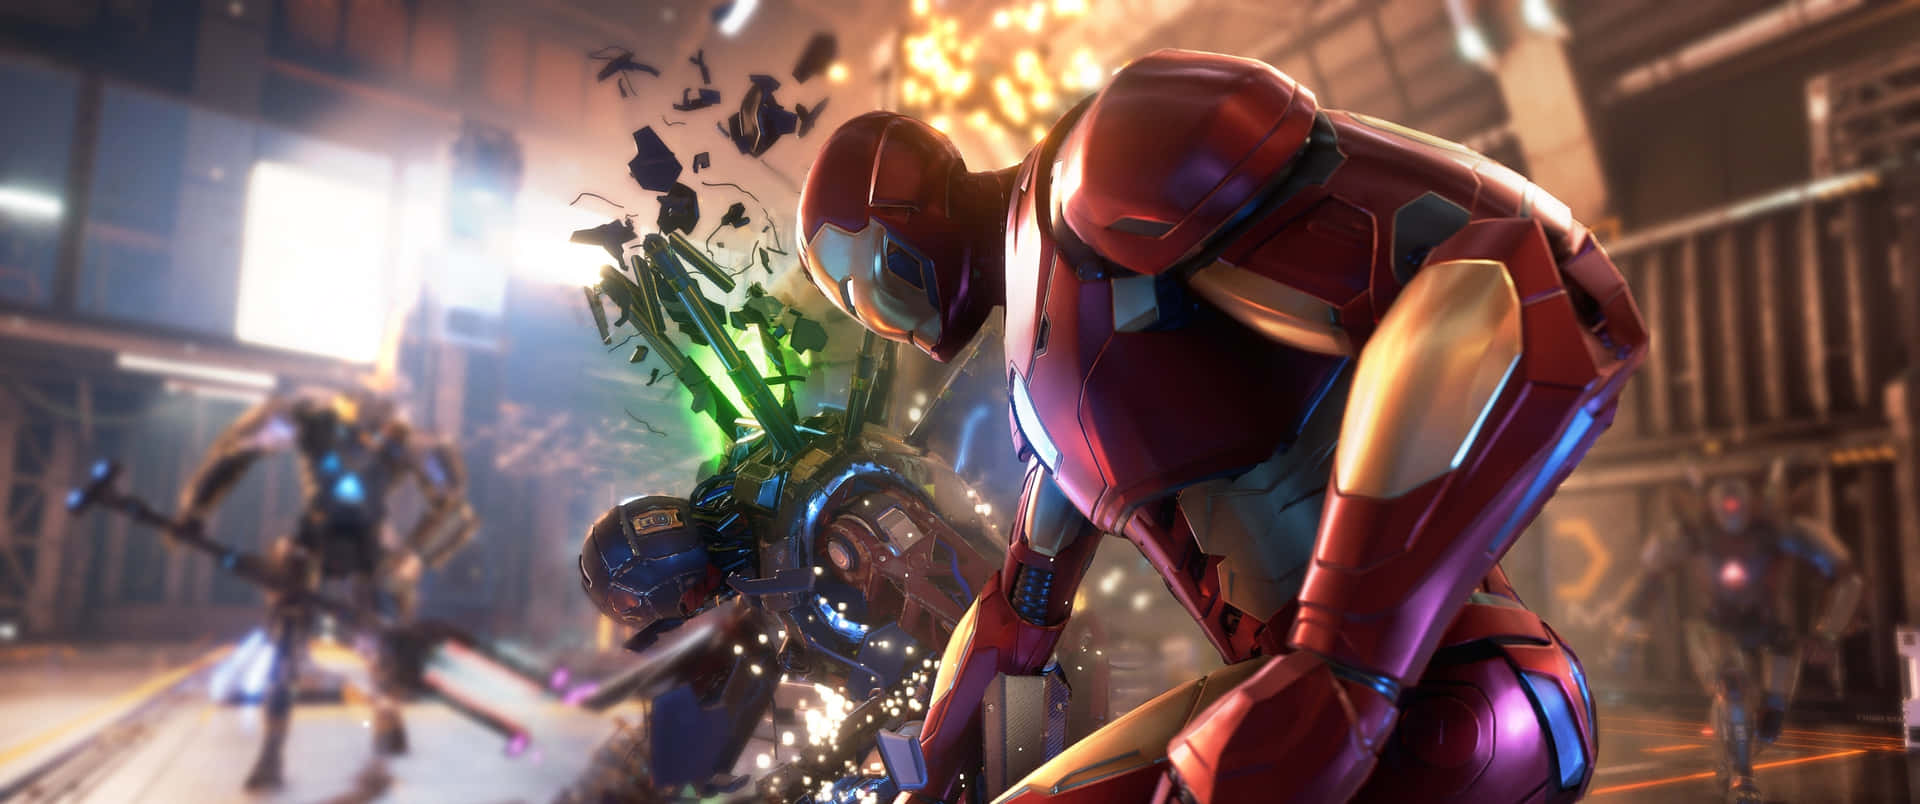 a scene from a video game with iron man and other characters